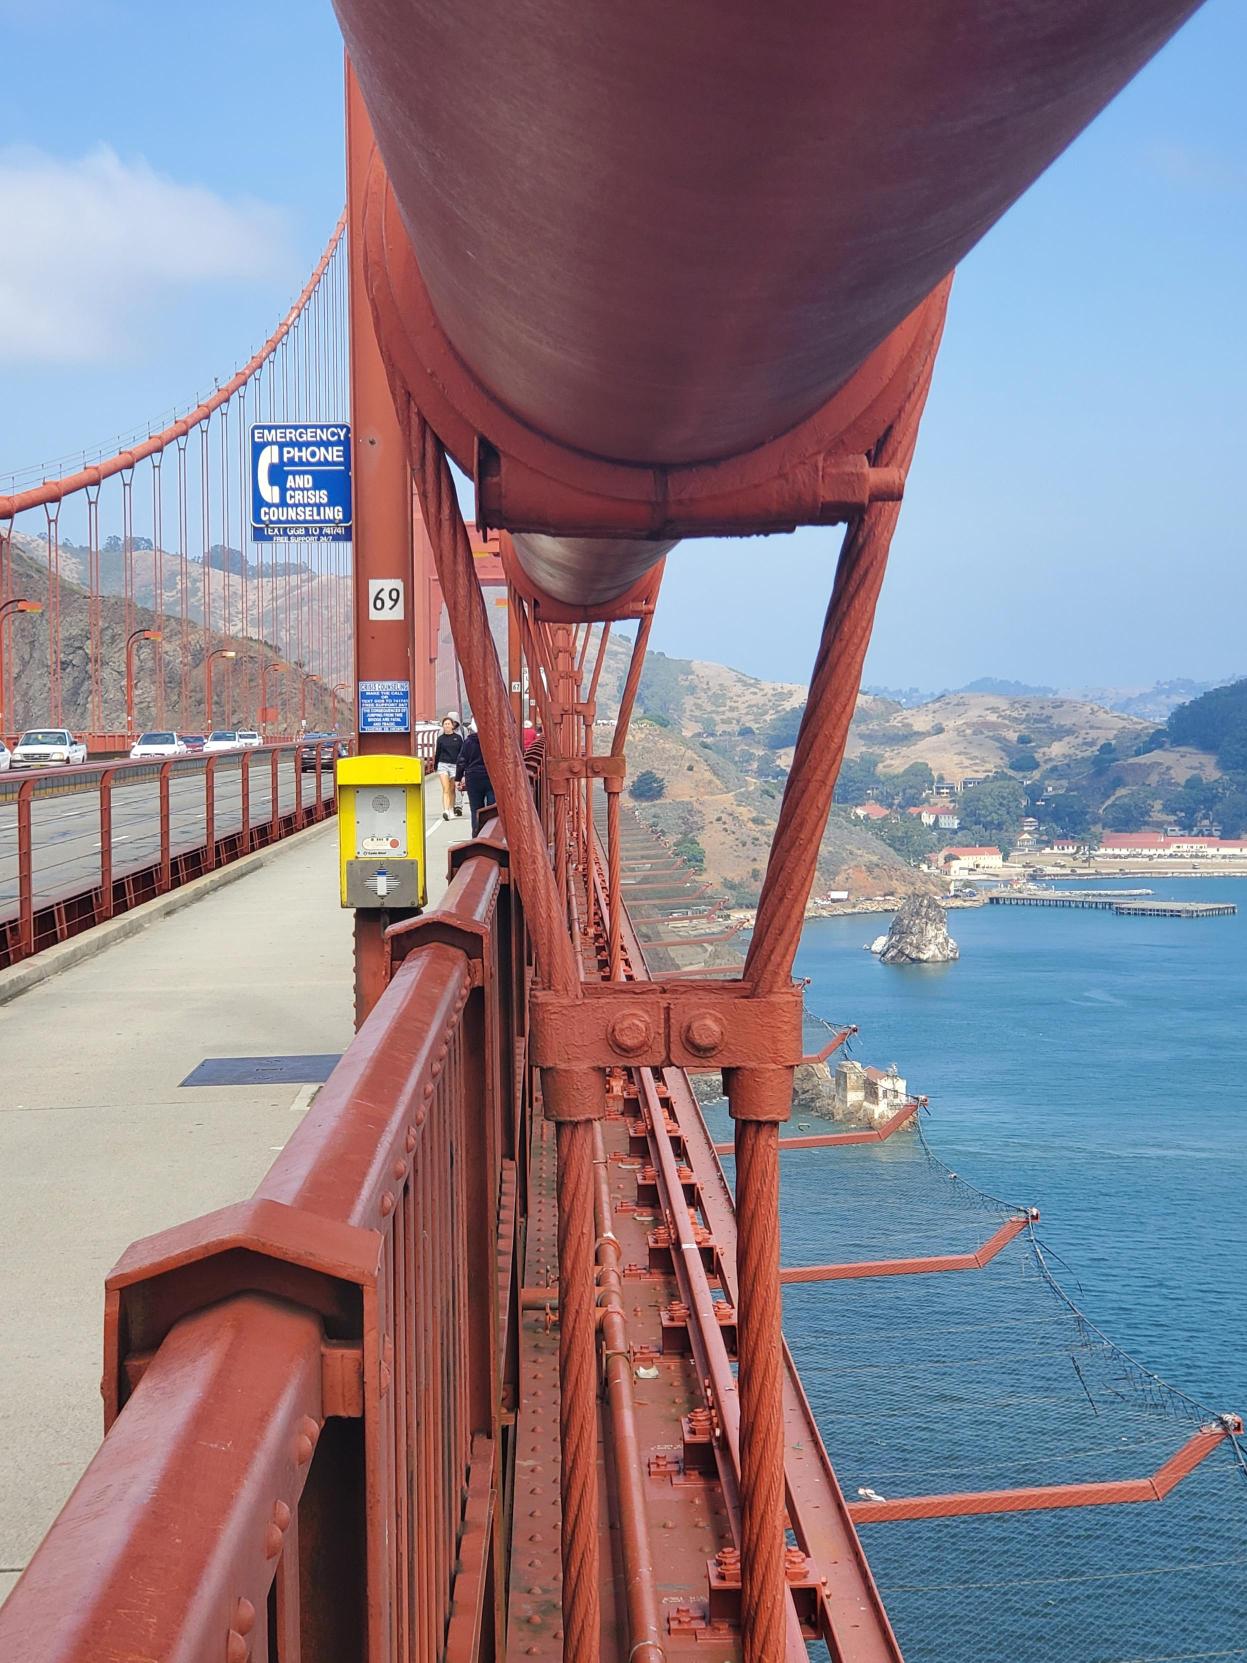 Crisis Line Information and Safety Nets on the Golden Gate Bridge